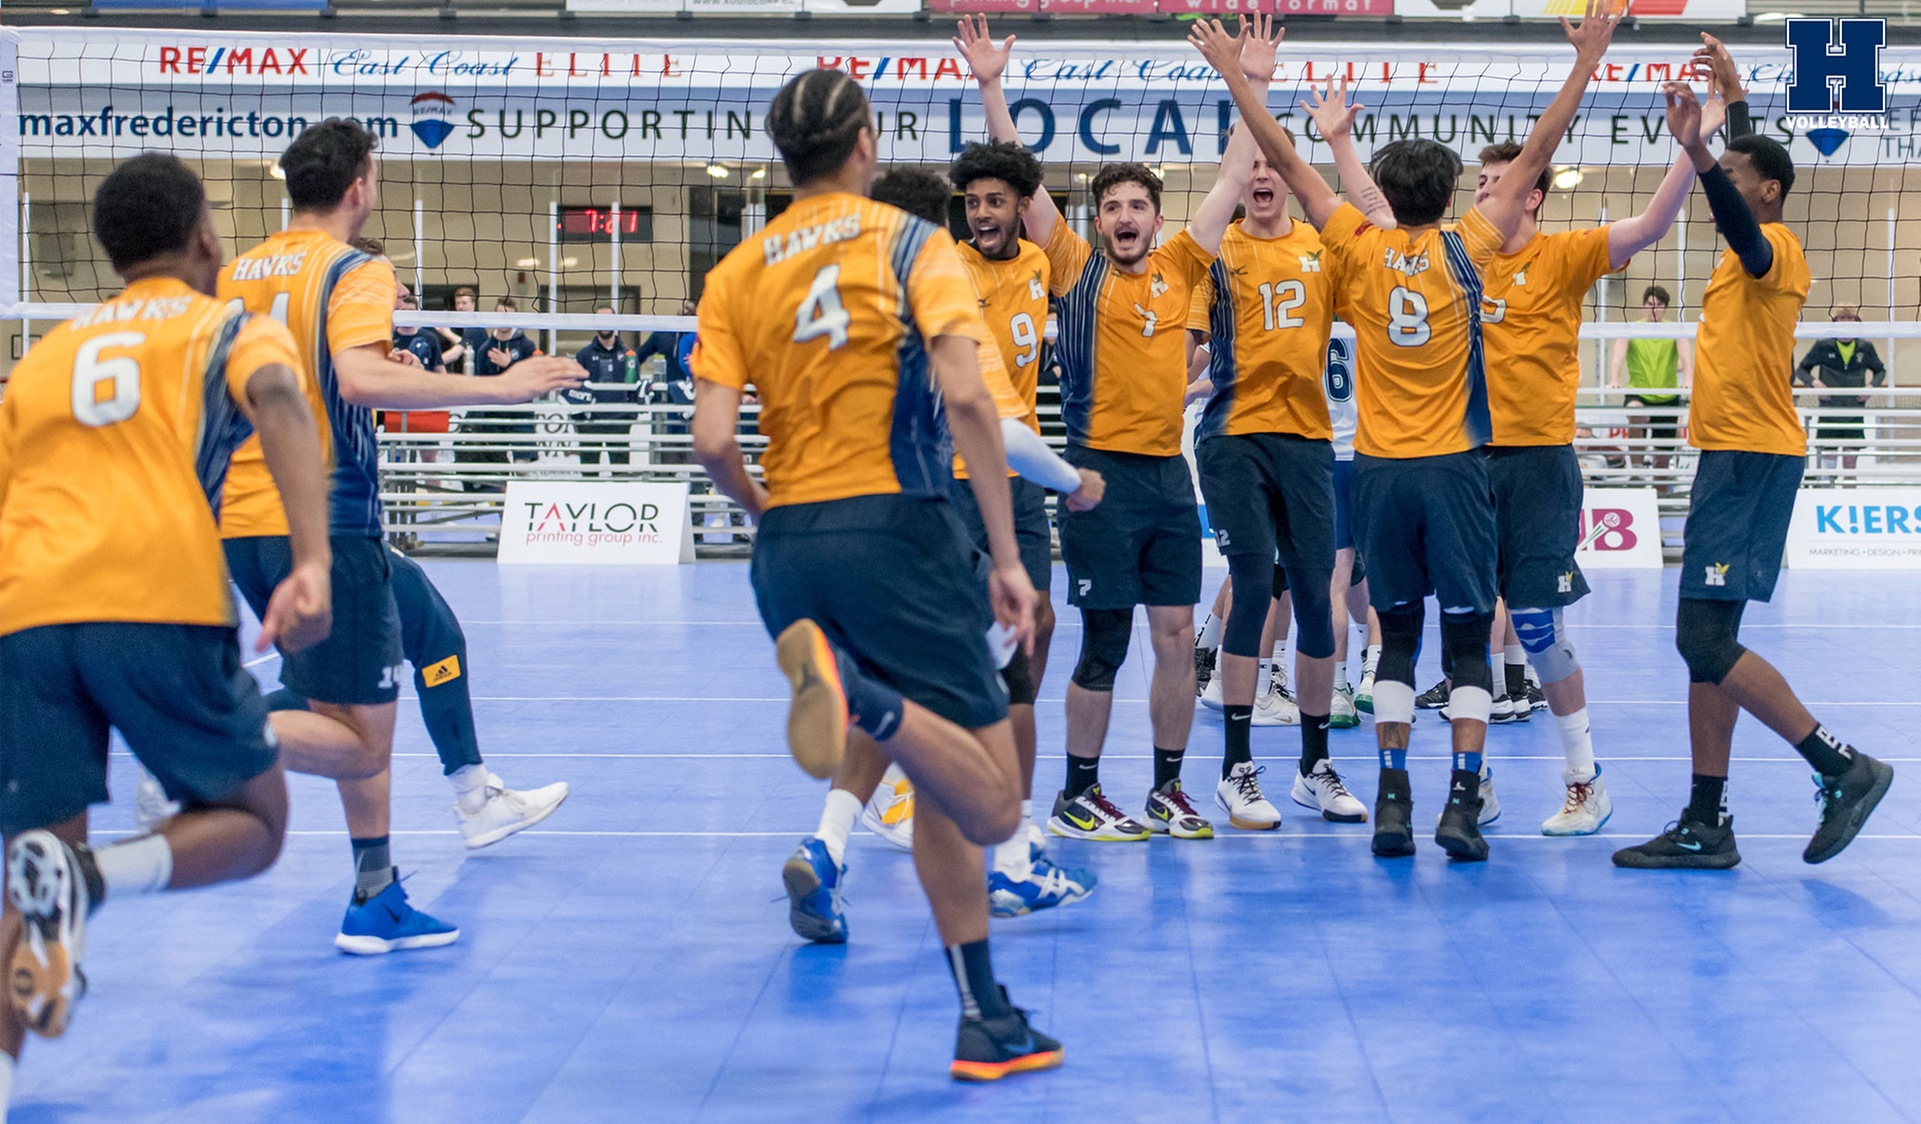 Men's Volleyball Books Ticket to Championship Final